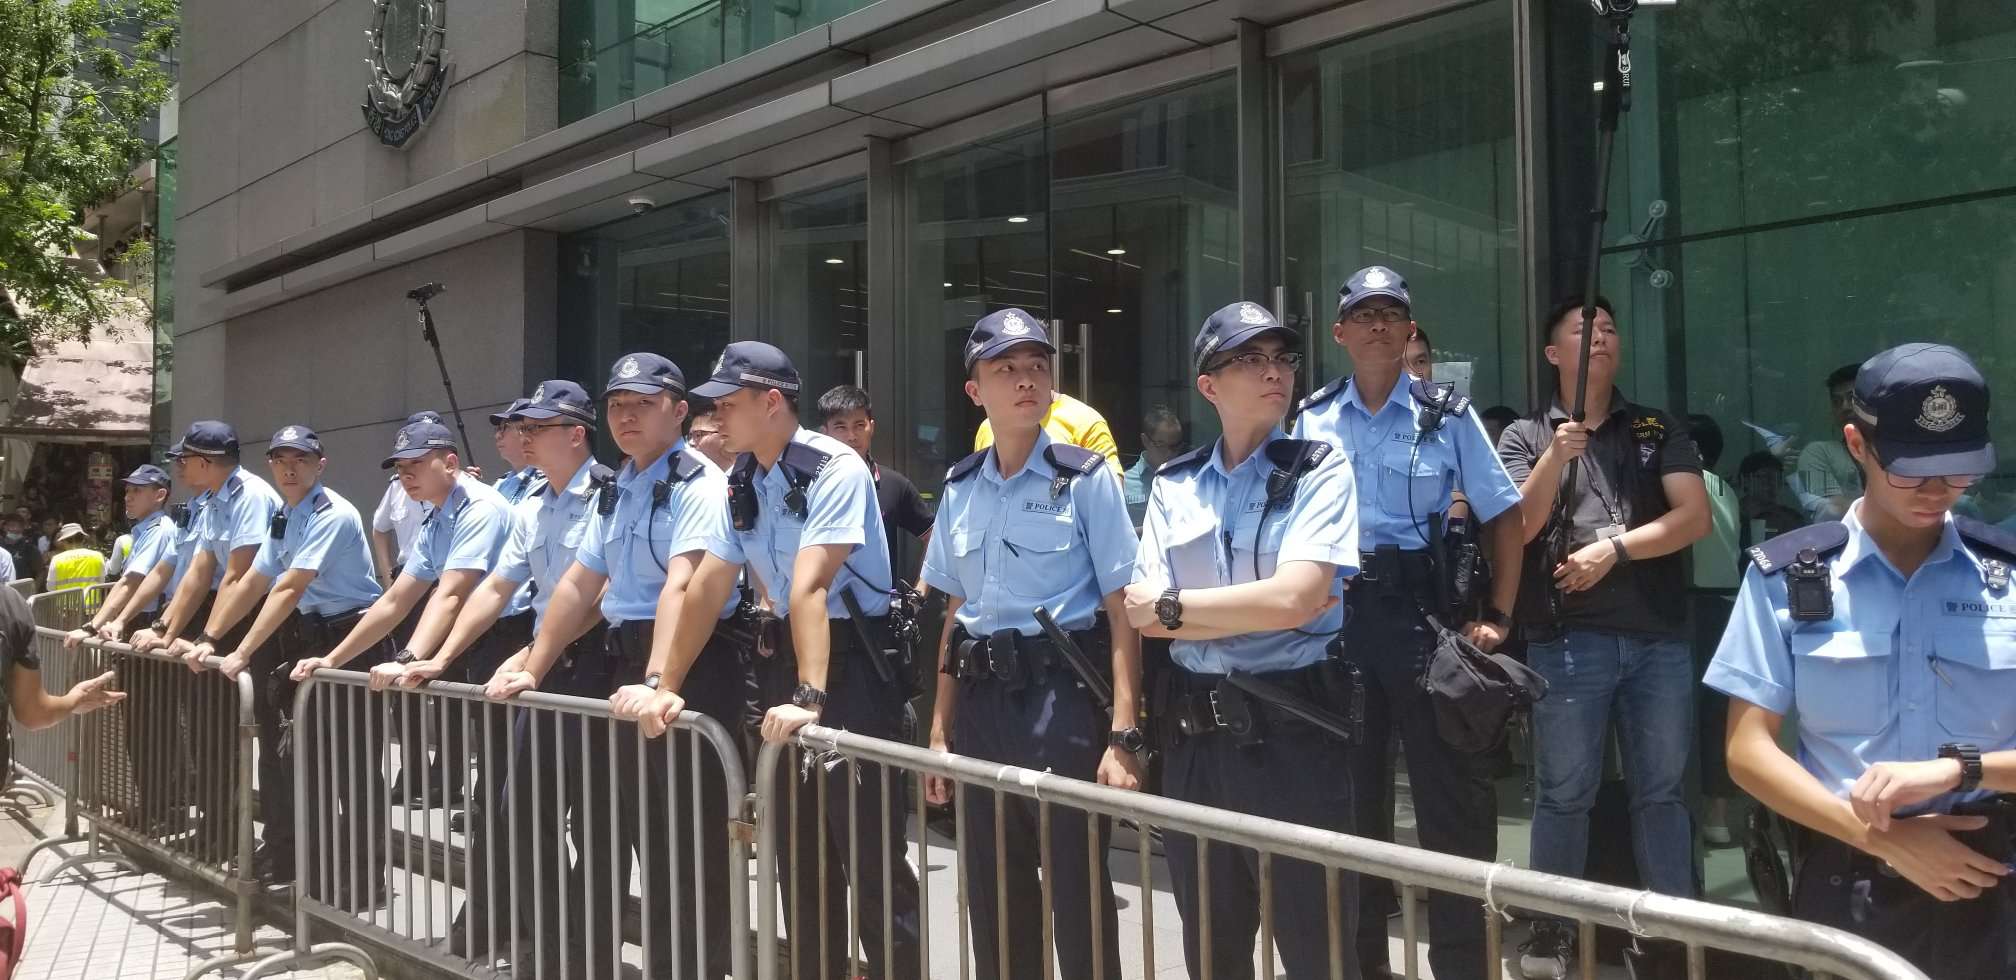 Police lined up outside of their headquarters in Wan Chai during a protest on Friday. Photo by Vicky Wong.